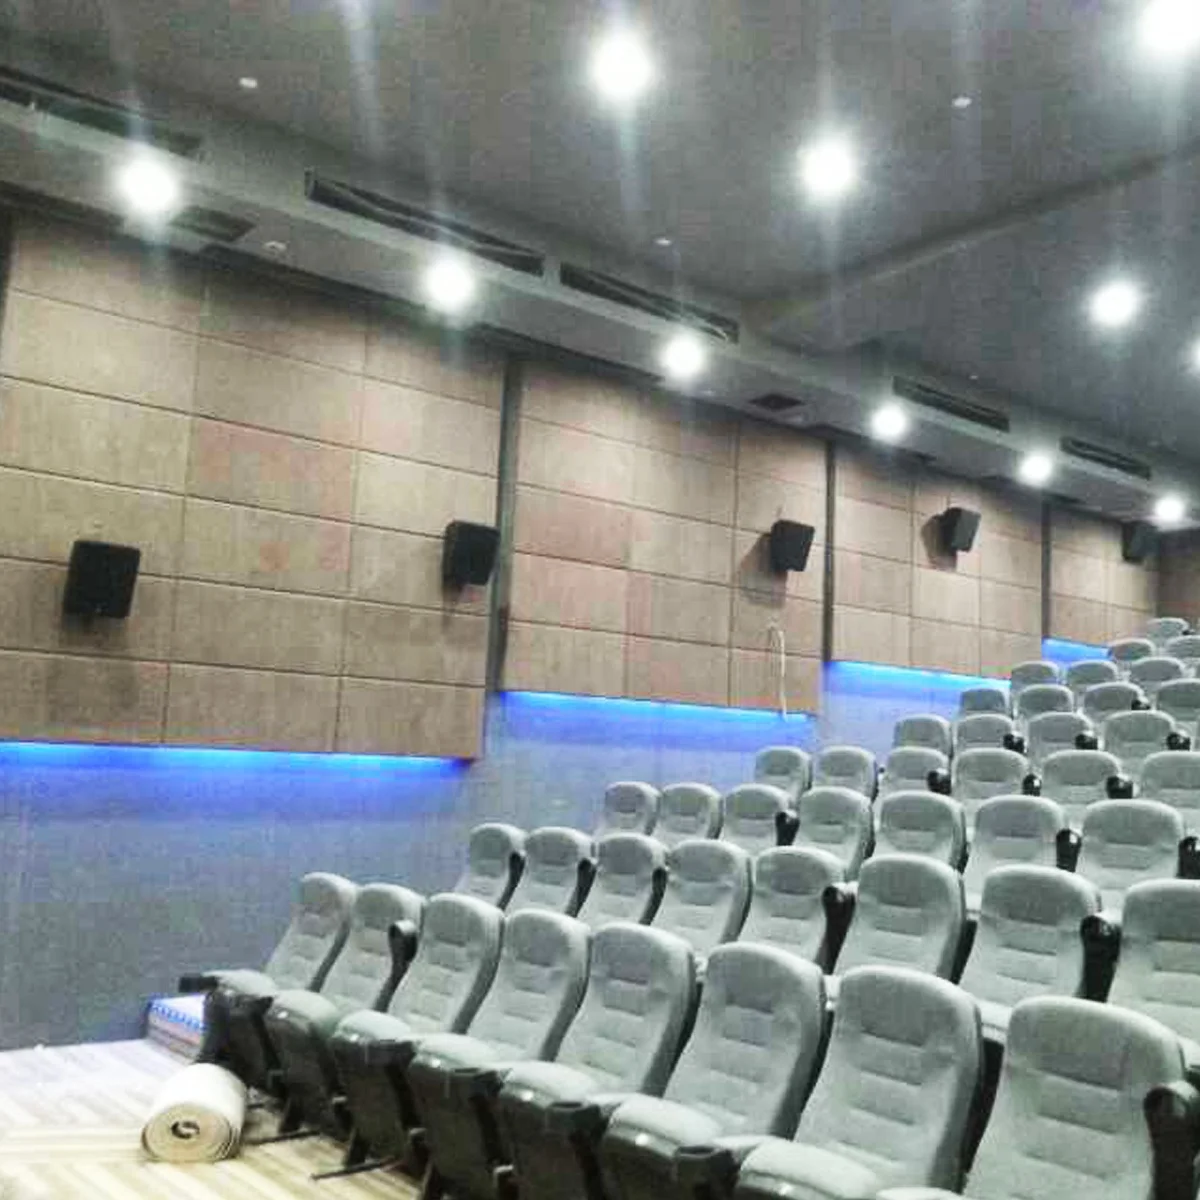 TianGe fabric soundproofing wall acoustic panels sound absorption soundproofing sheet for cinema